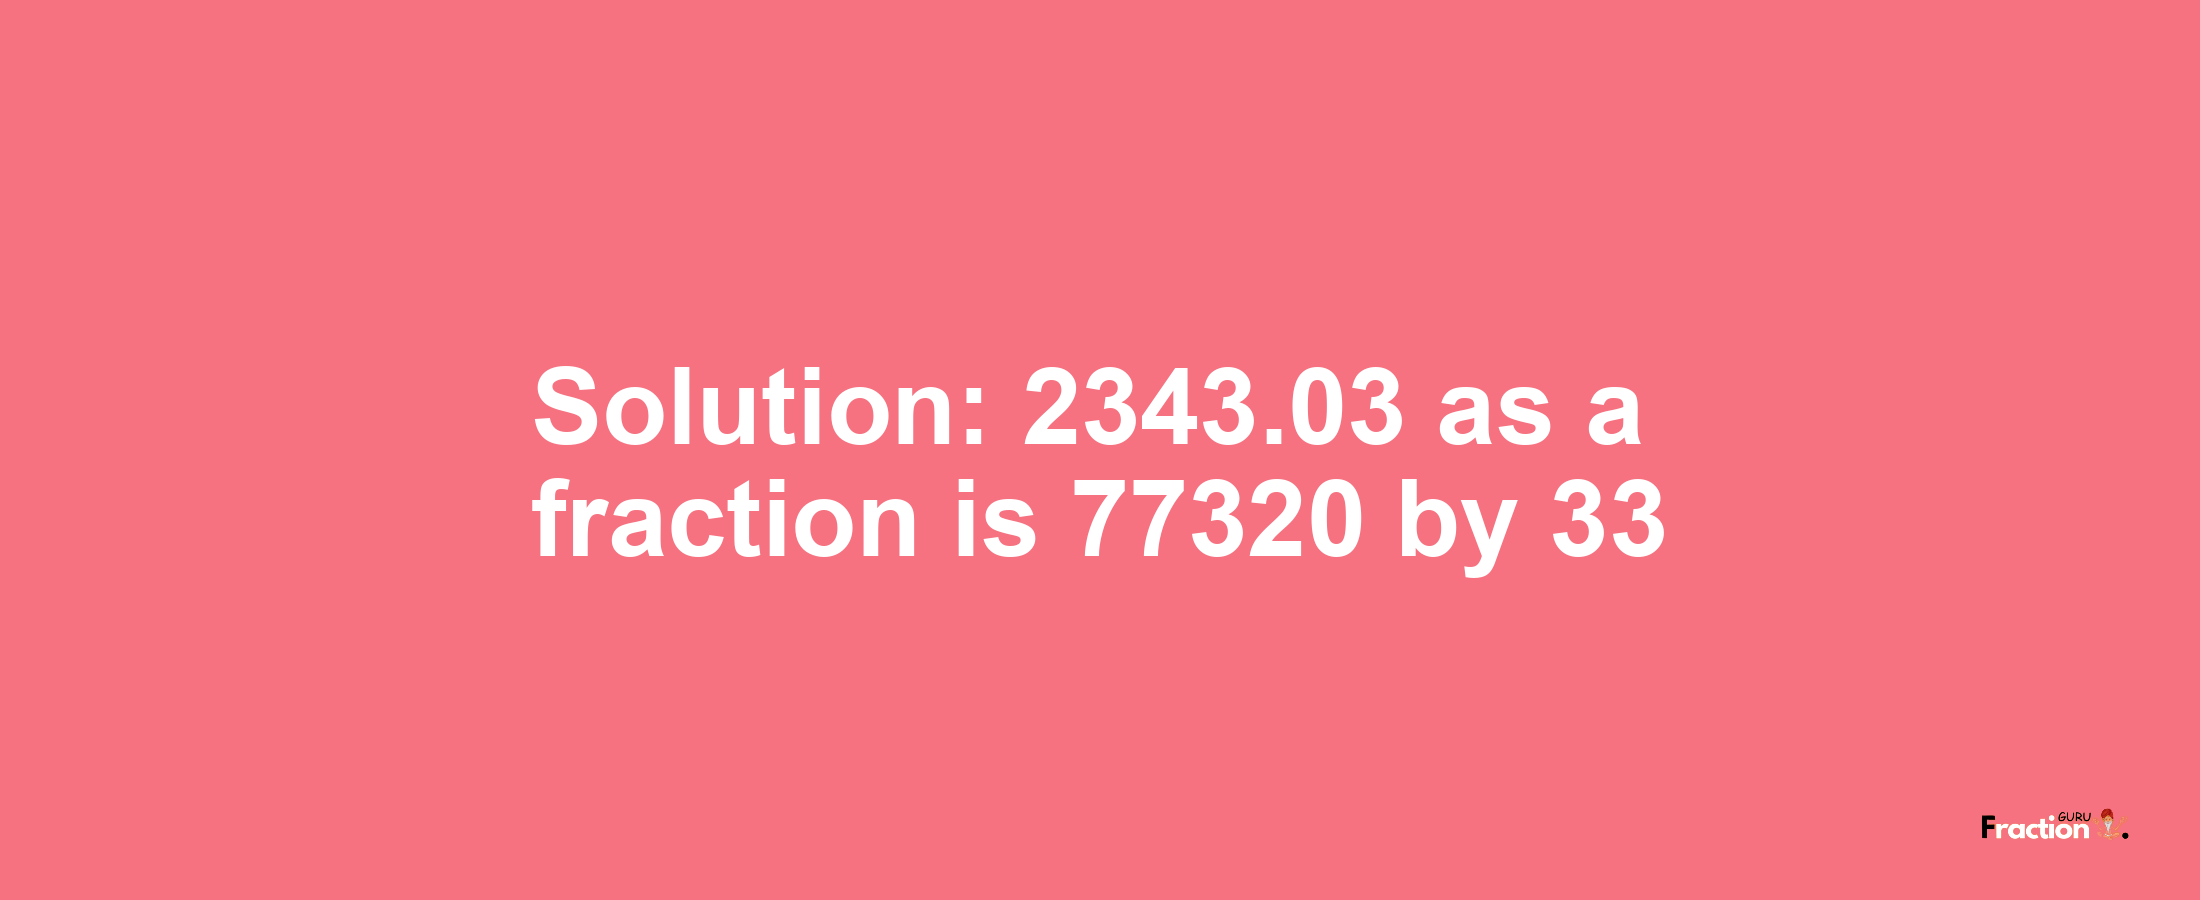 Solution:2343.03 as a fraction is 77320/33